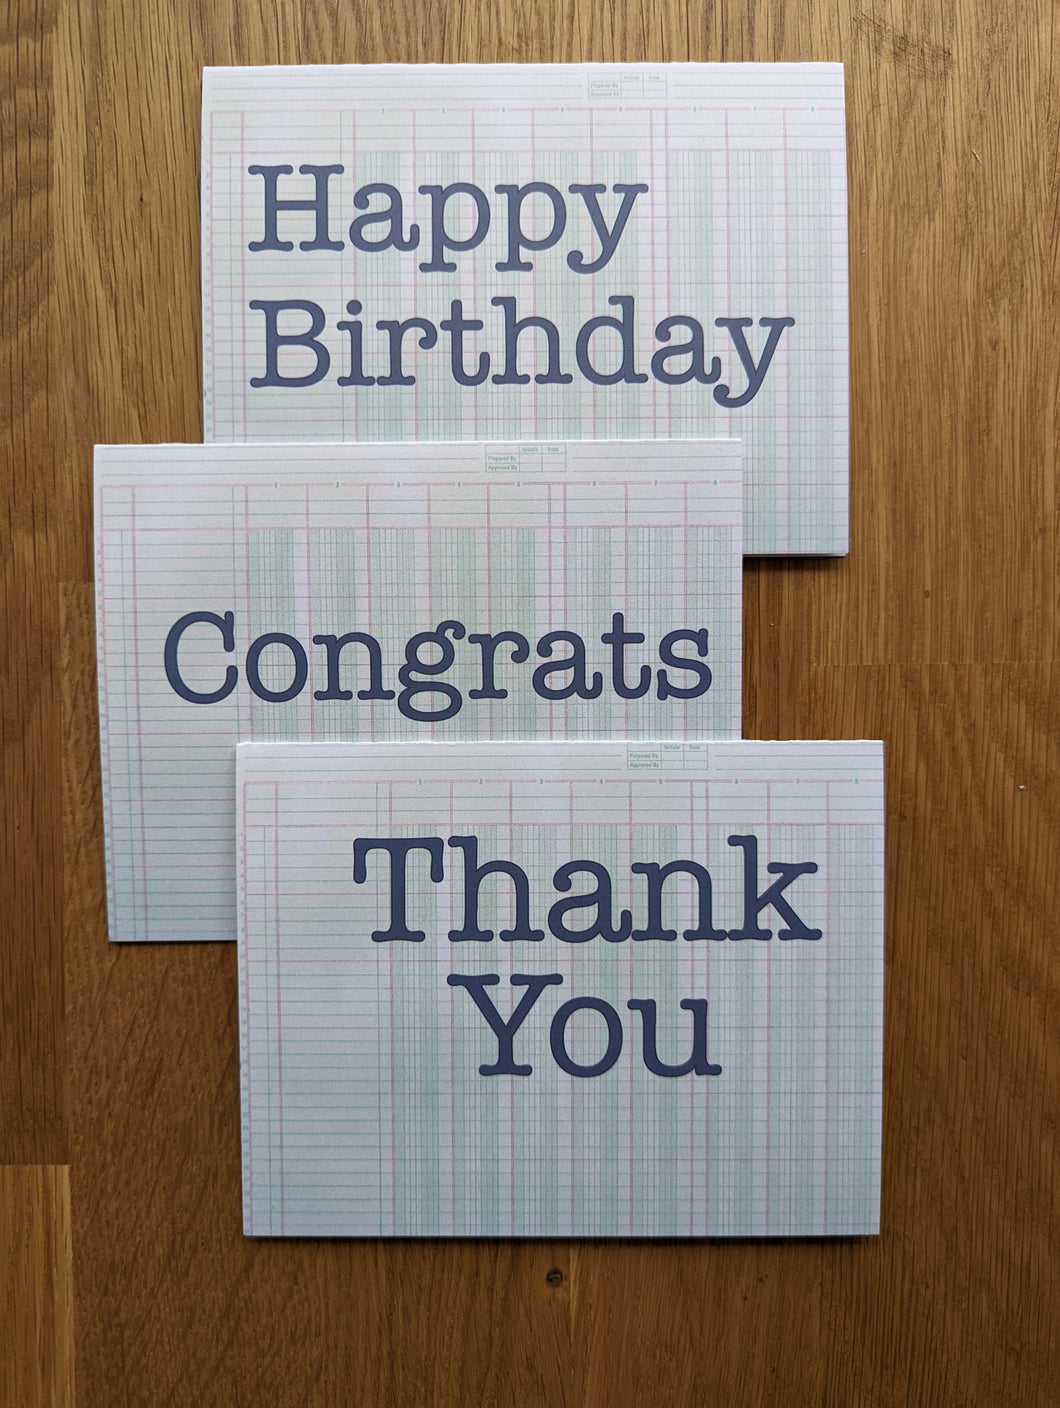 Three accounting greeting cards atop a wooden table that read Happy Birthday, Congrats, and Thank You